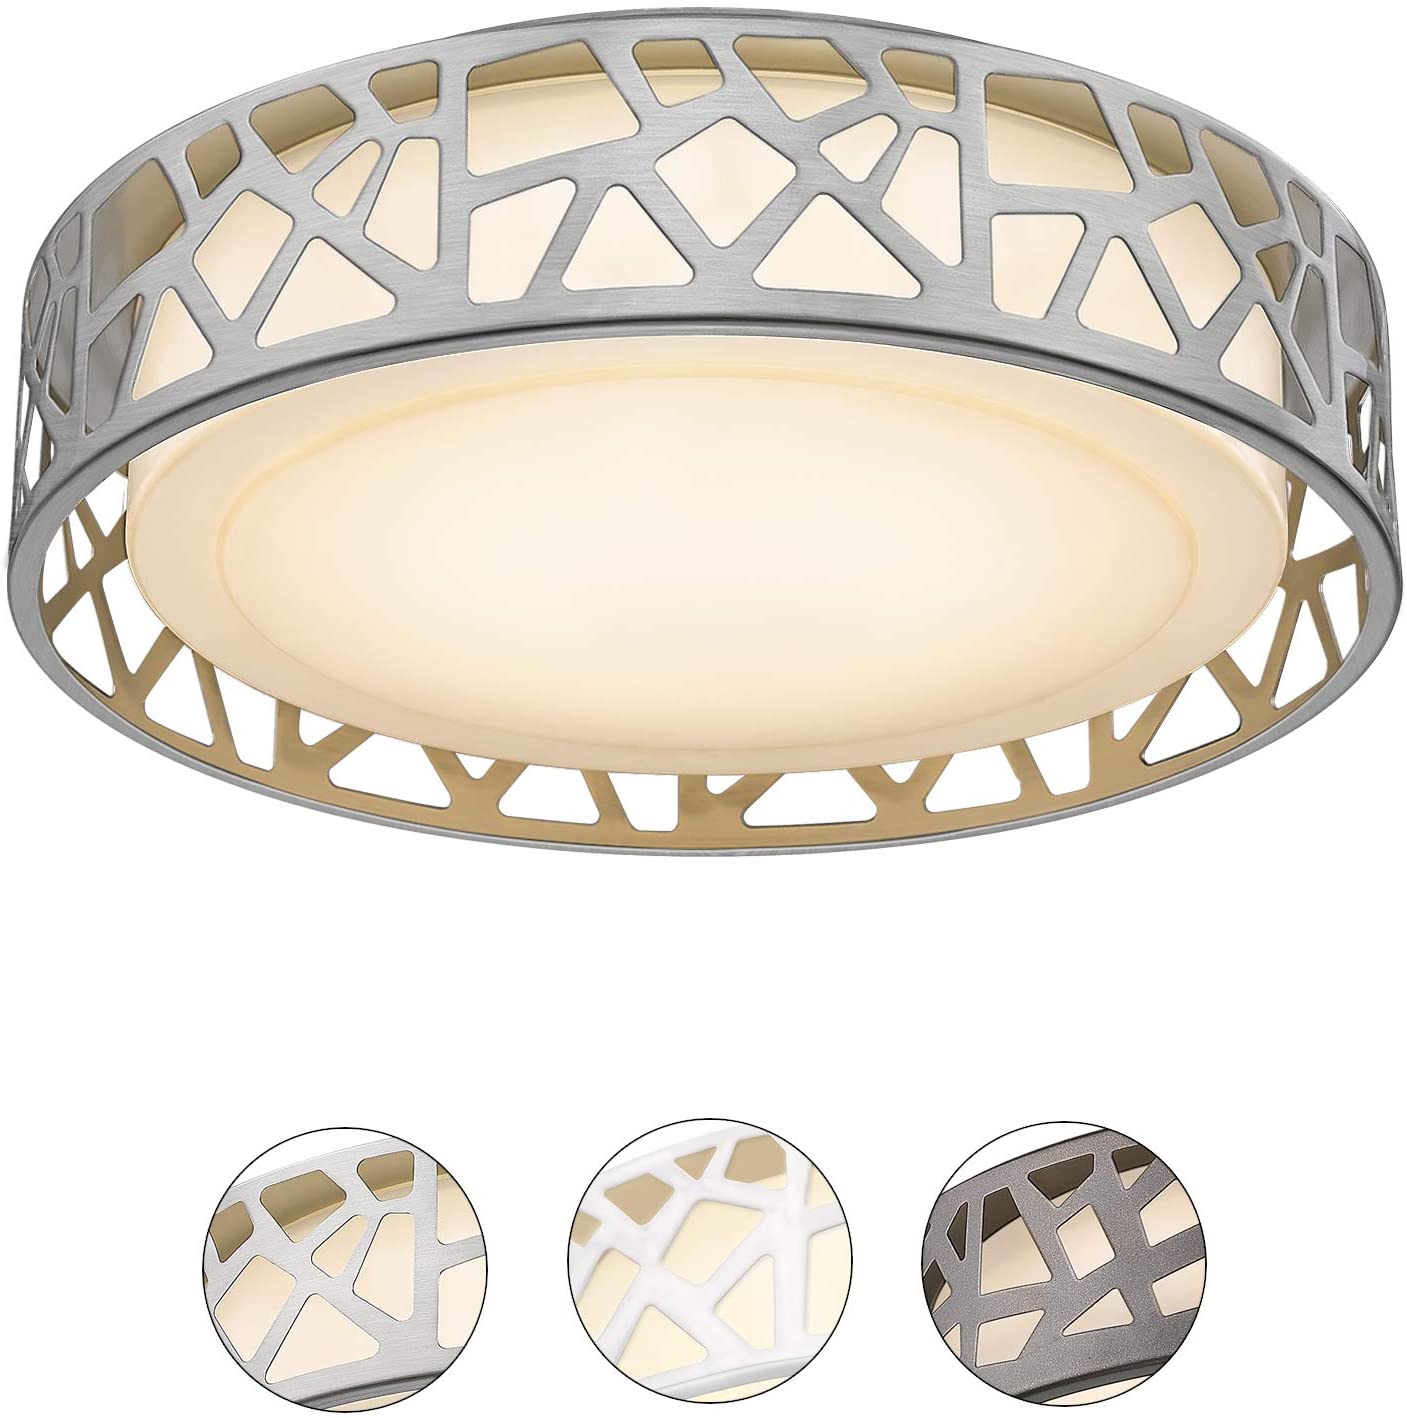 Ceiling Light Fixtures, VICNIE 14 inch 20W 1400 Lumens LED Flush Mount, Dimmable 3000K Warm White, Brush Nickel Finished, ETL Listed for Kitchen, Hallway, Bedroom, Stairways